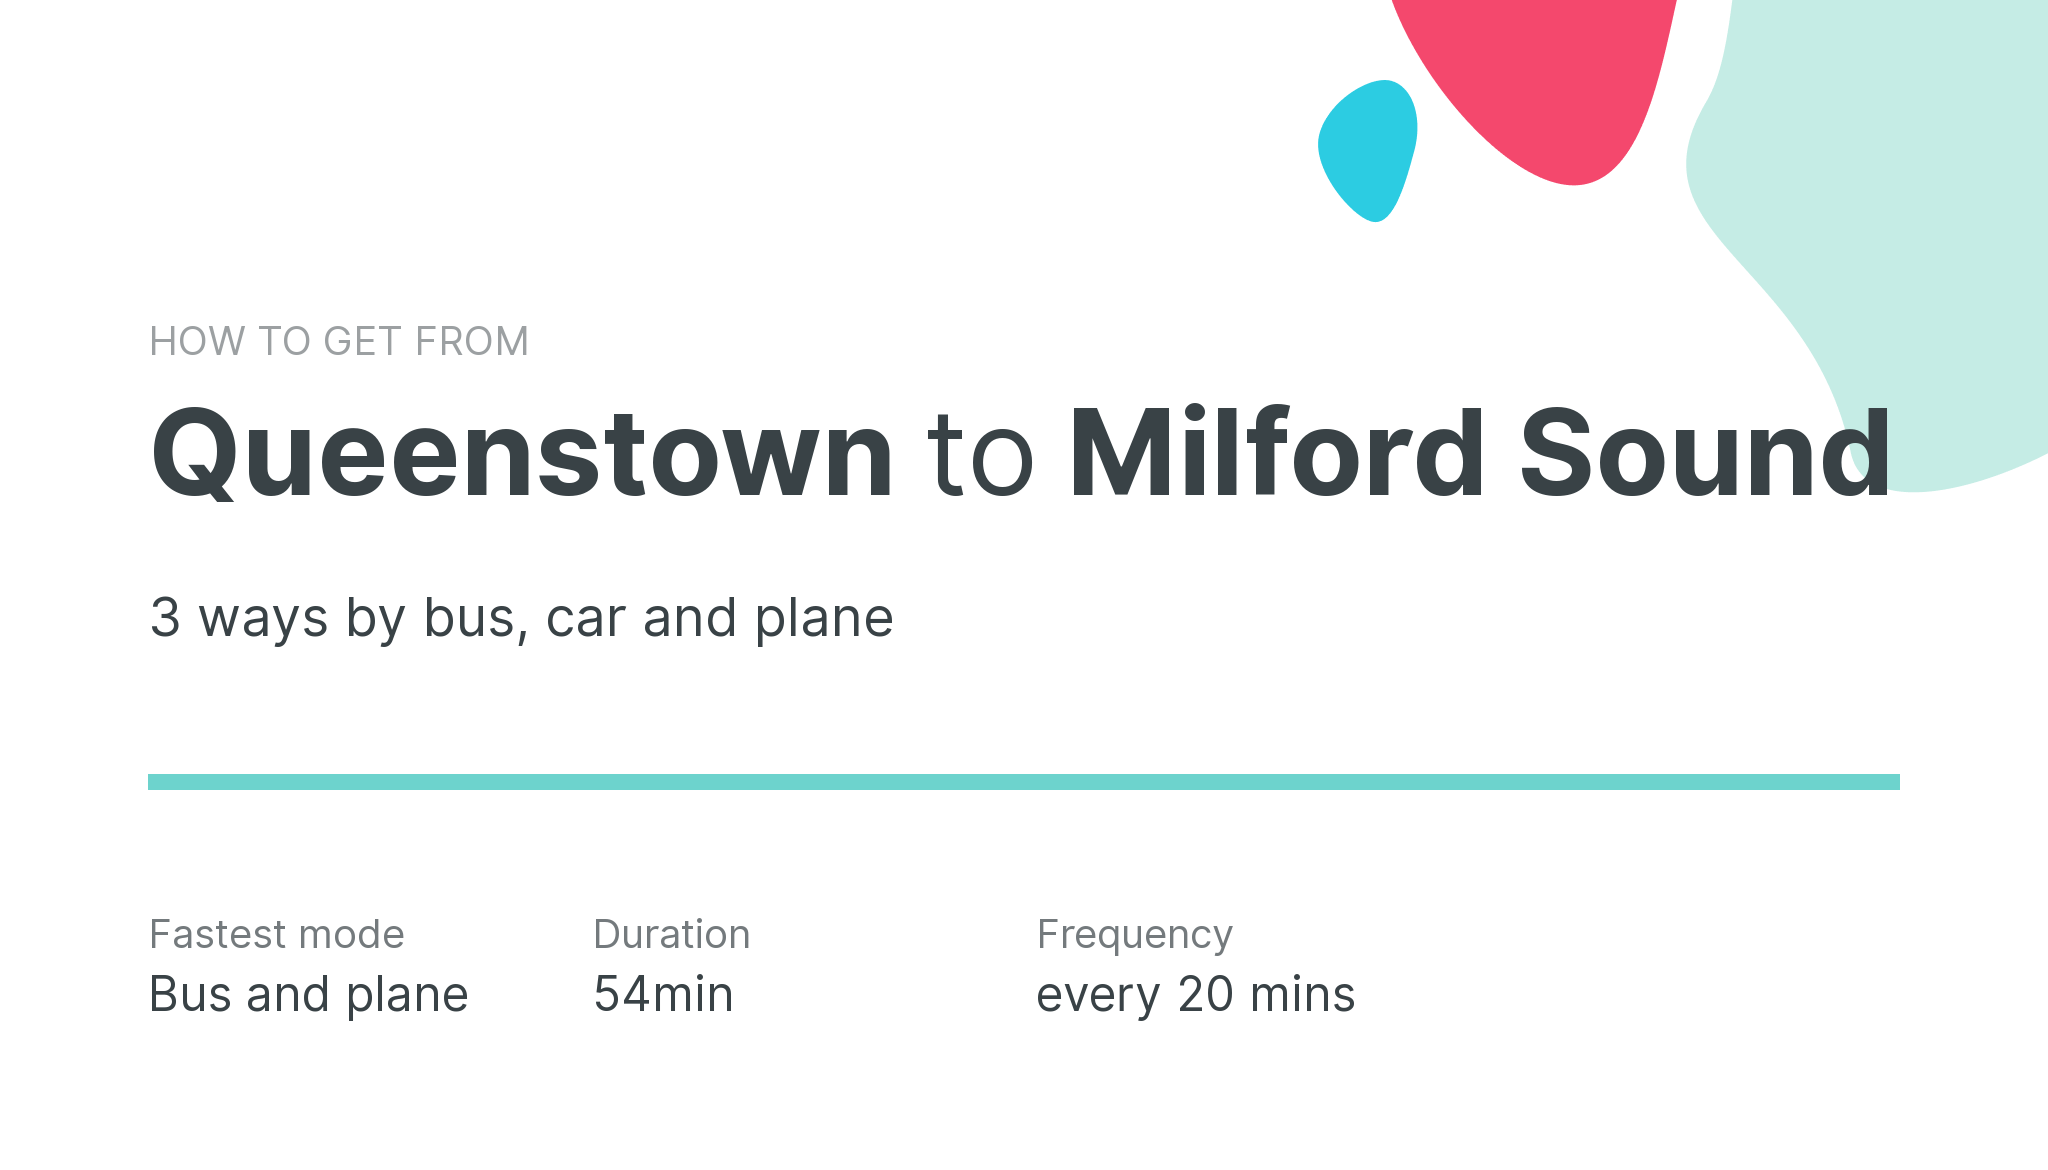 How do I get from Queenstown to Milford Sound